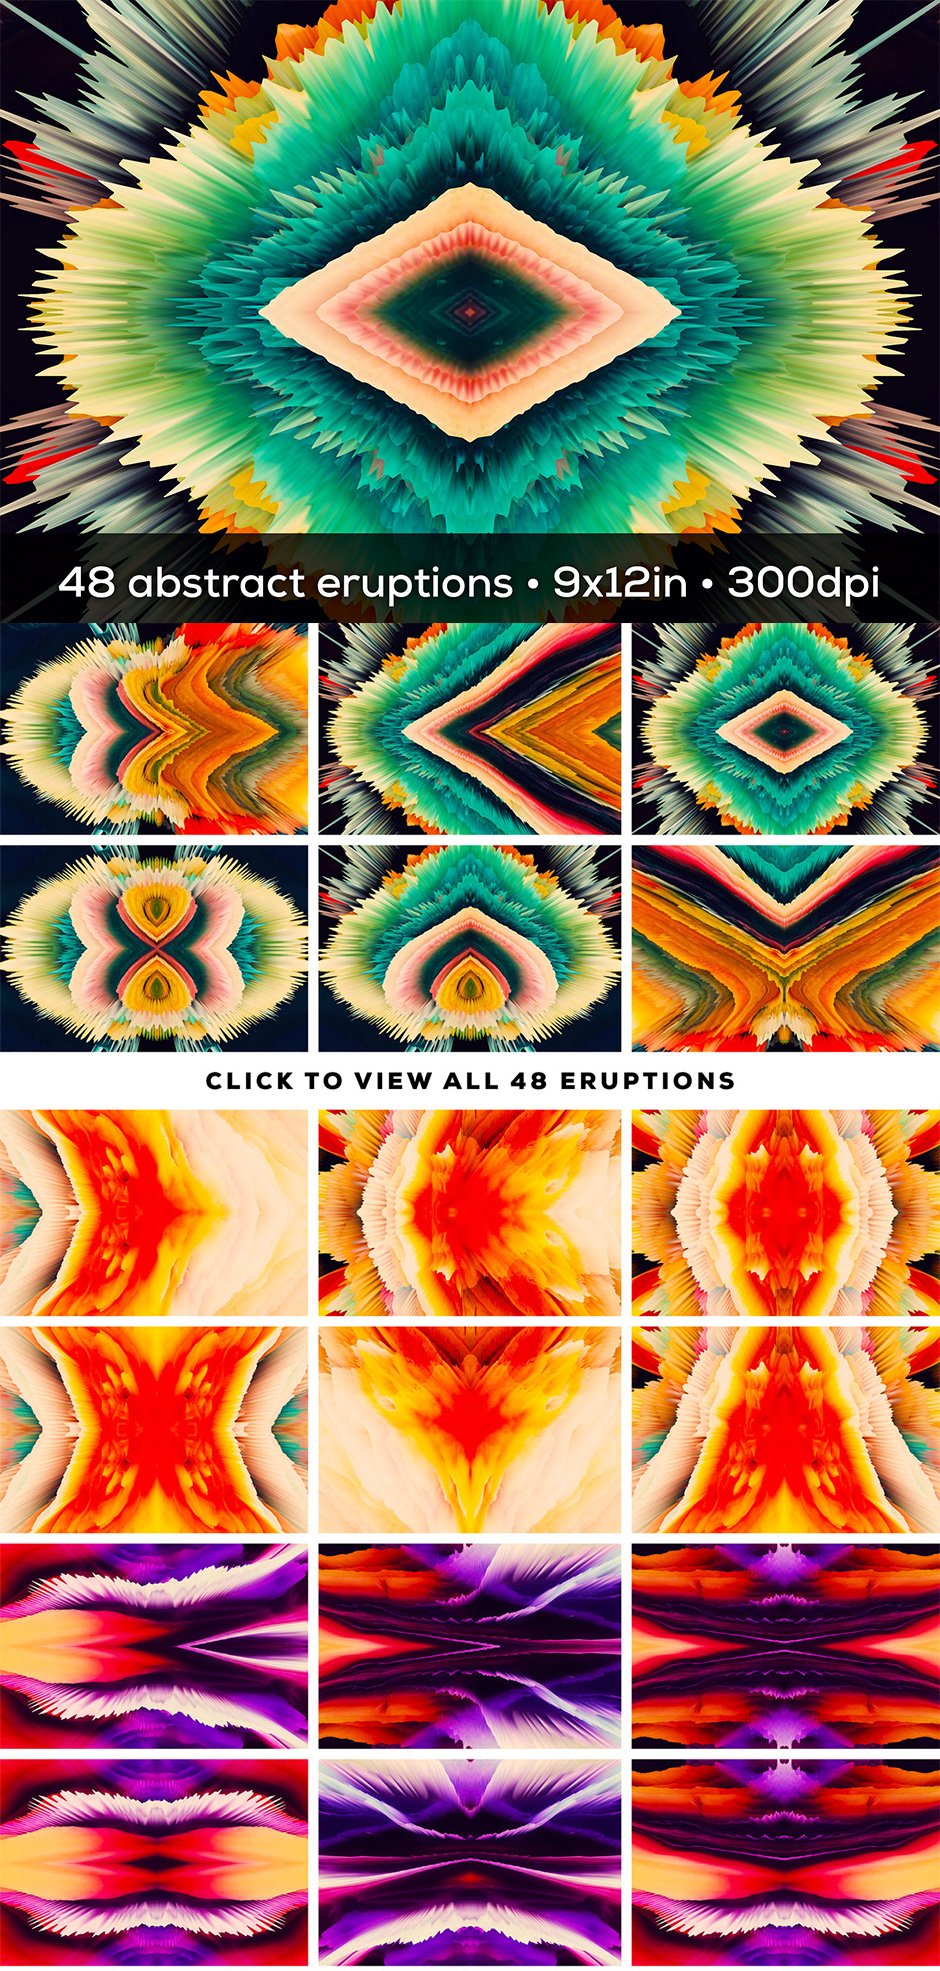 Eruption: 48 Abstract Explosions